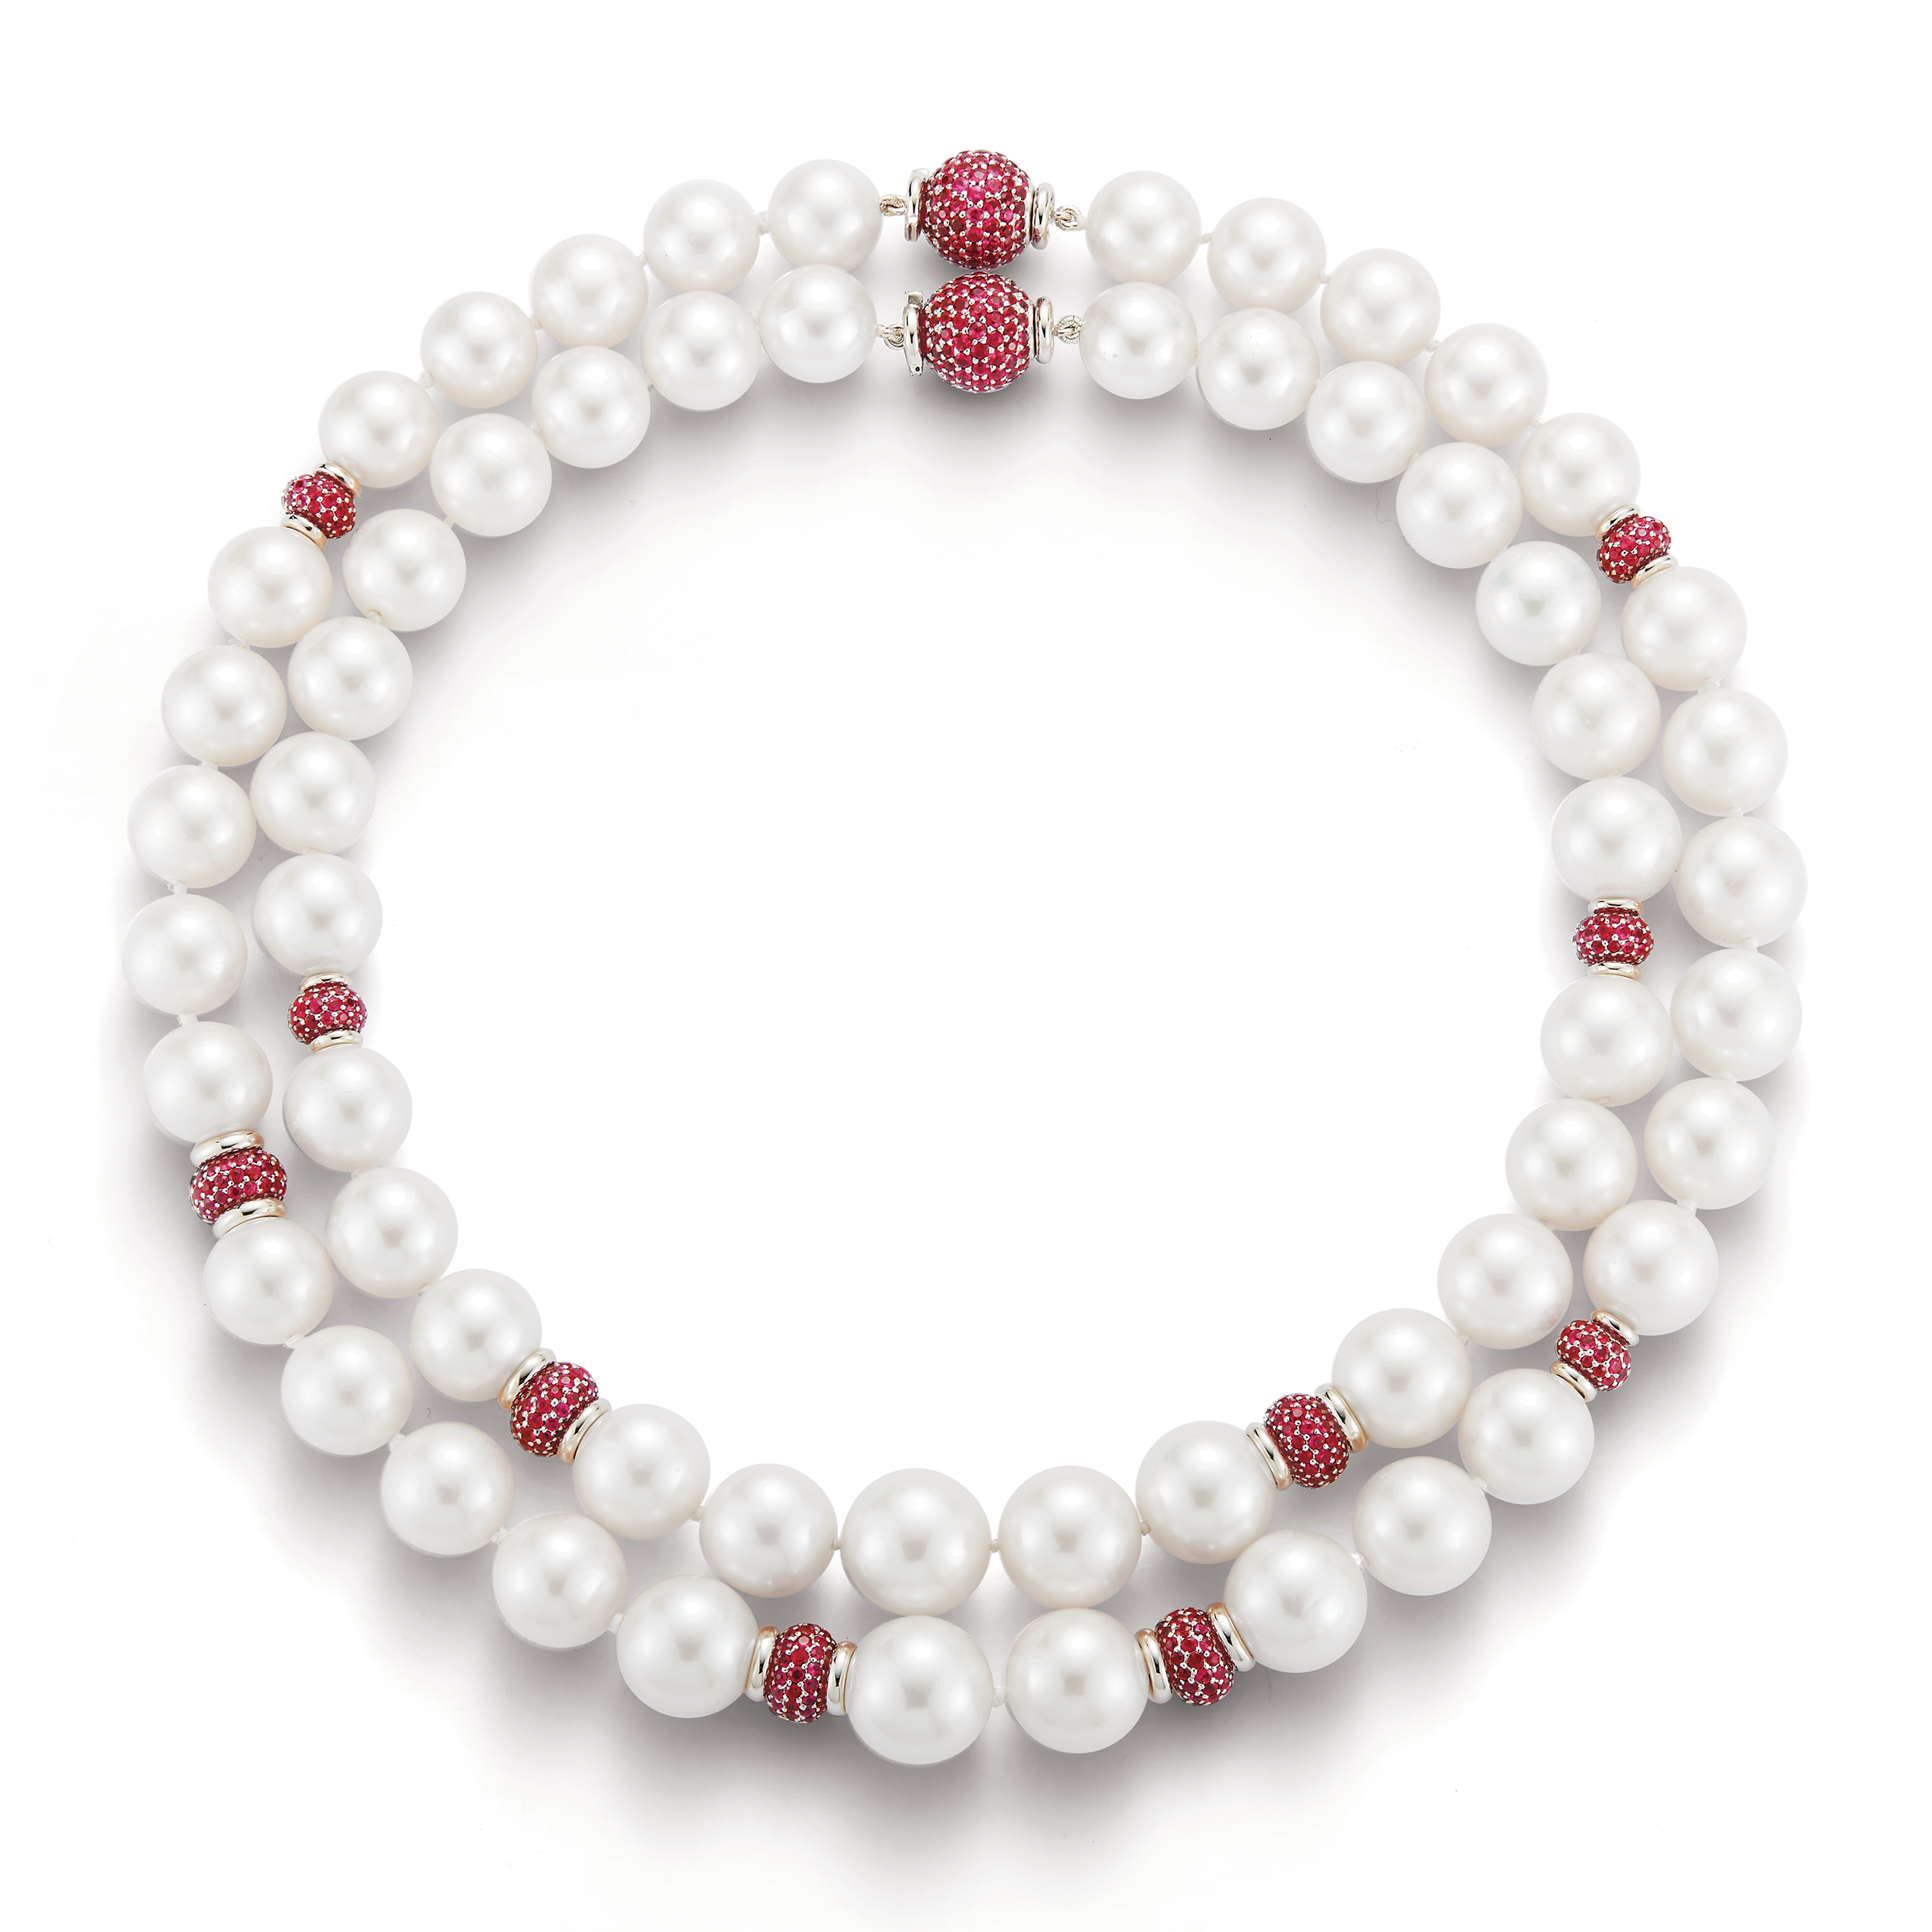 Juno Pearl Necklaces with Pave Ruby